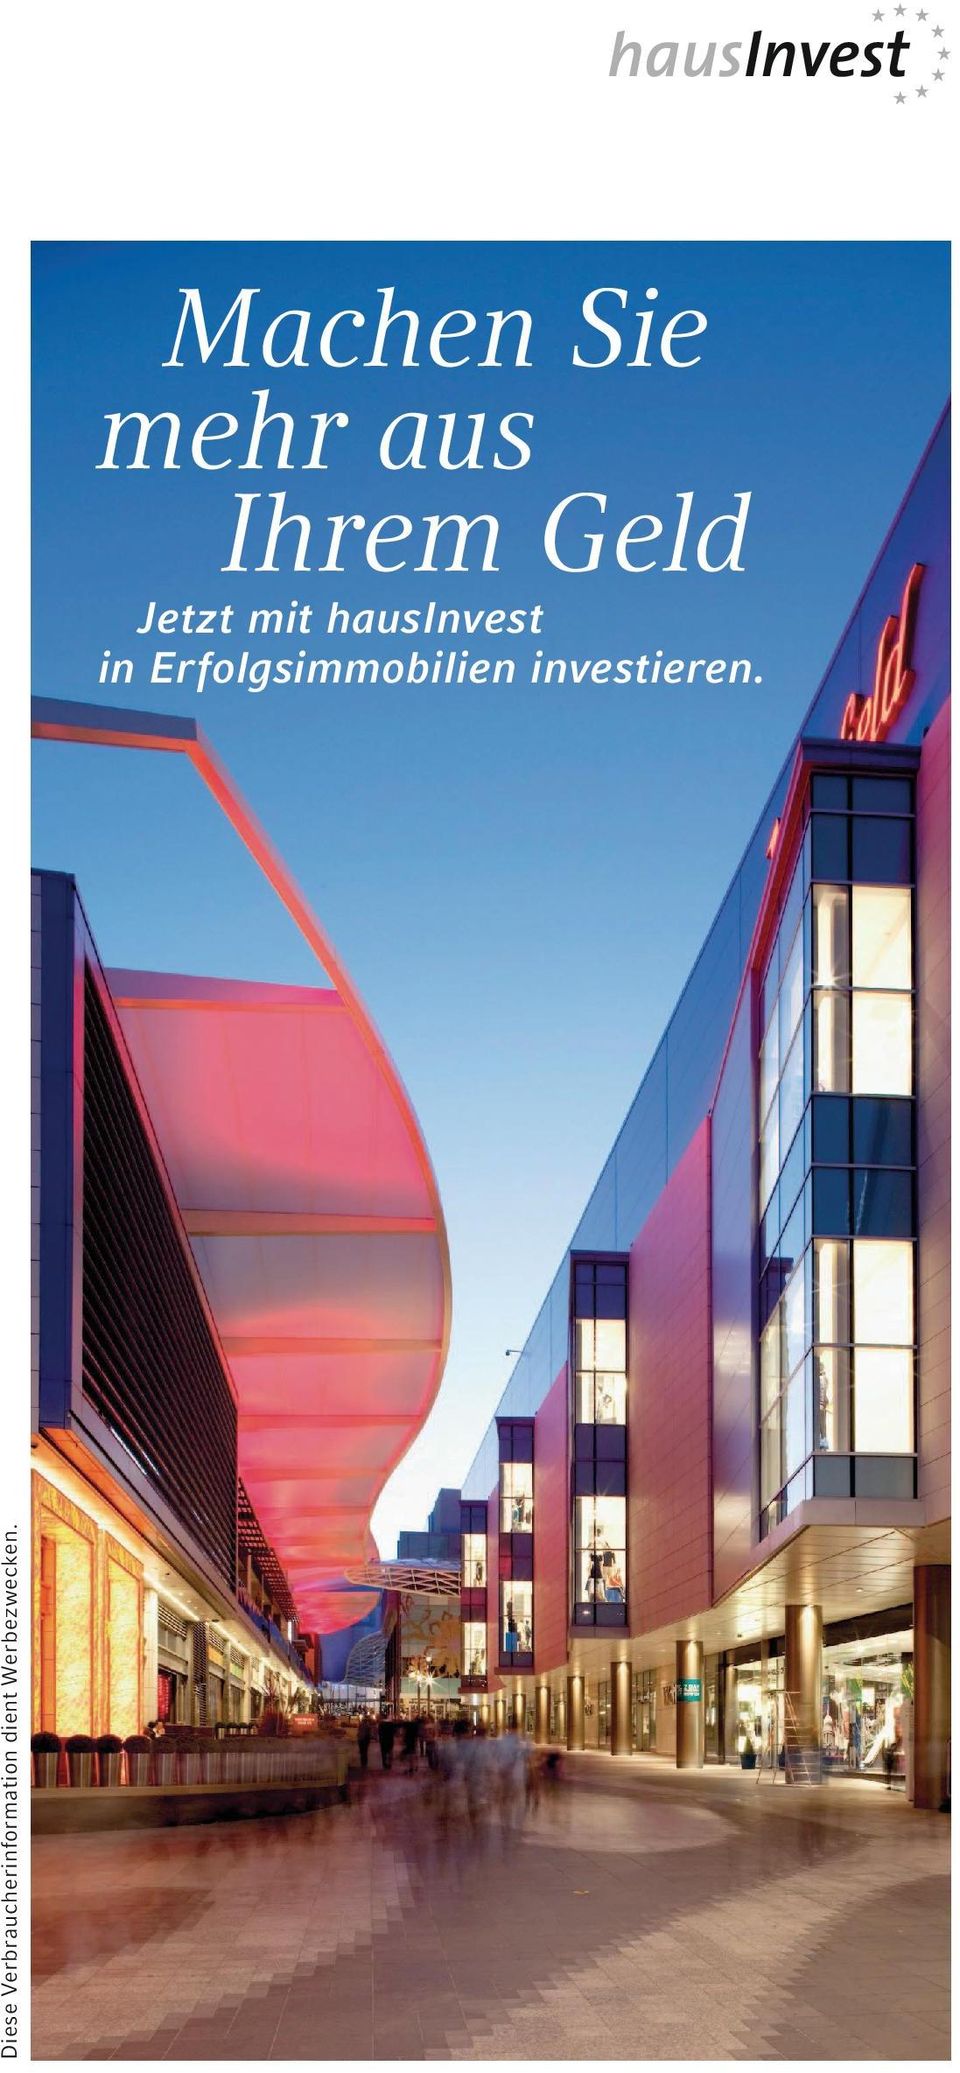 Hausinvest Offener Immobilienfonds Pdf Free Download